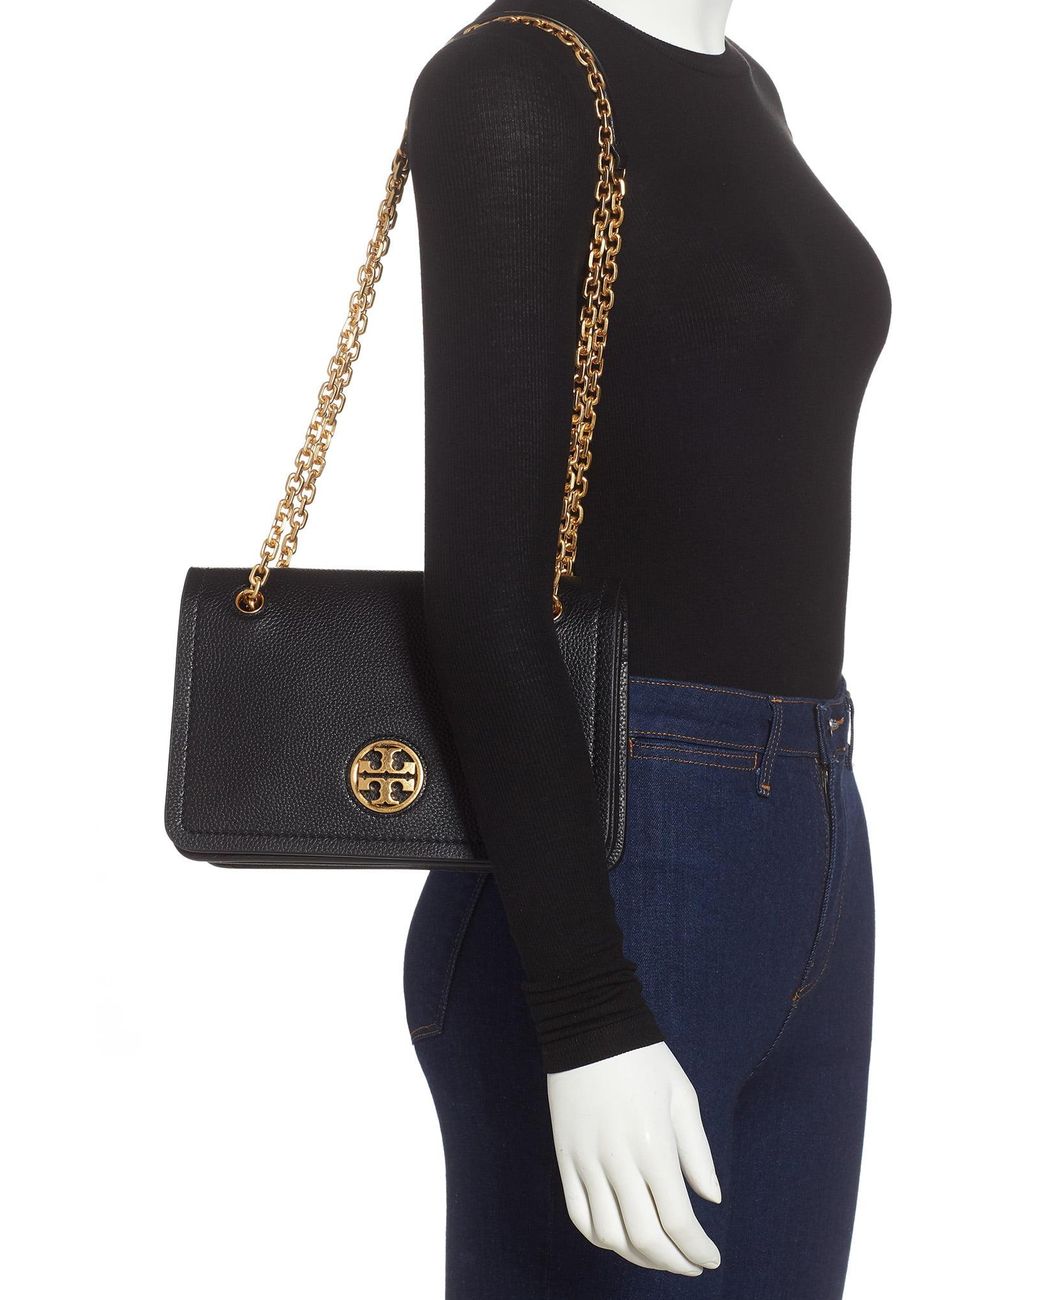 Tory Burch Carson Convertible Leather Crossbody Bag in Black | Lyst